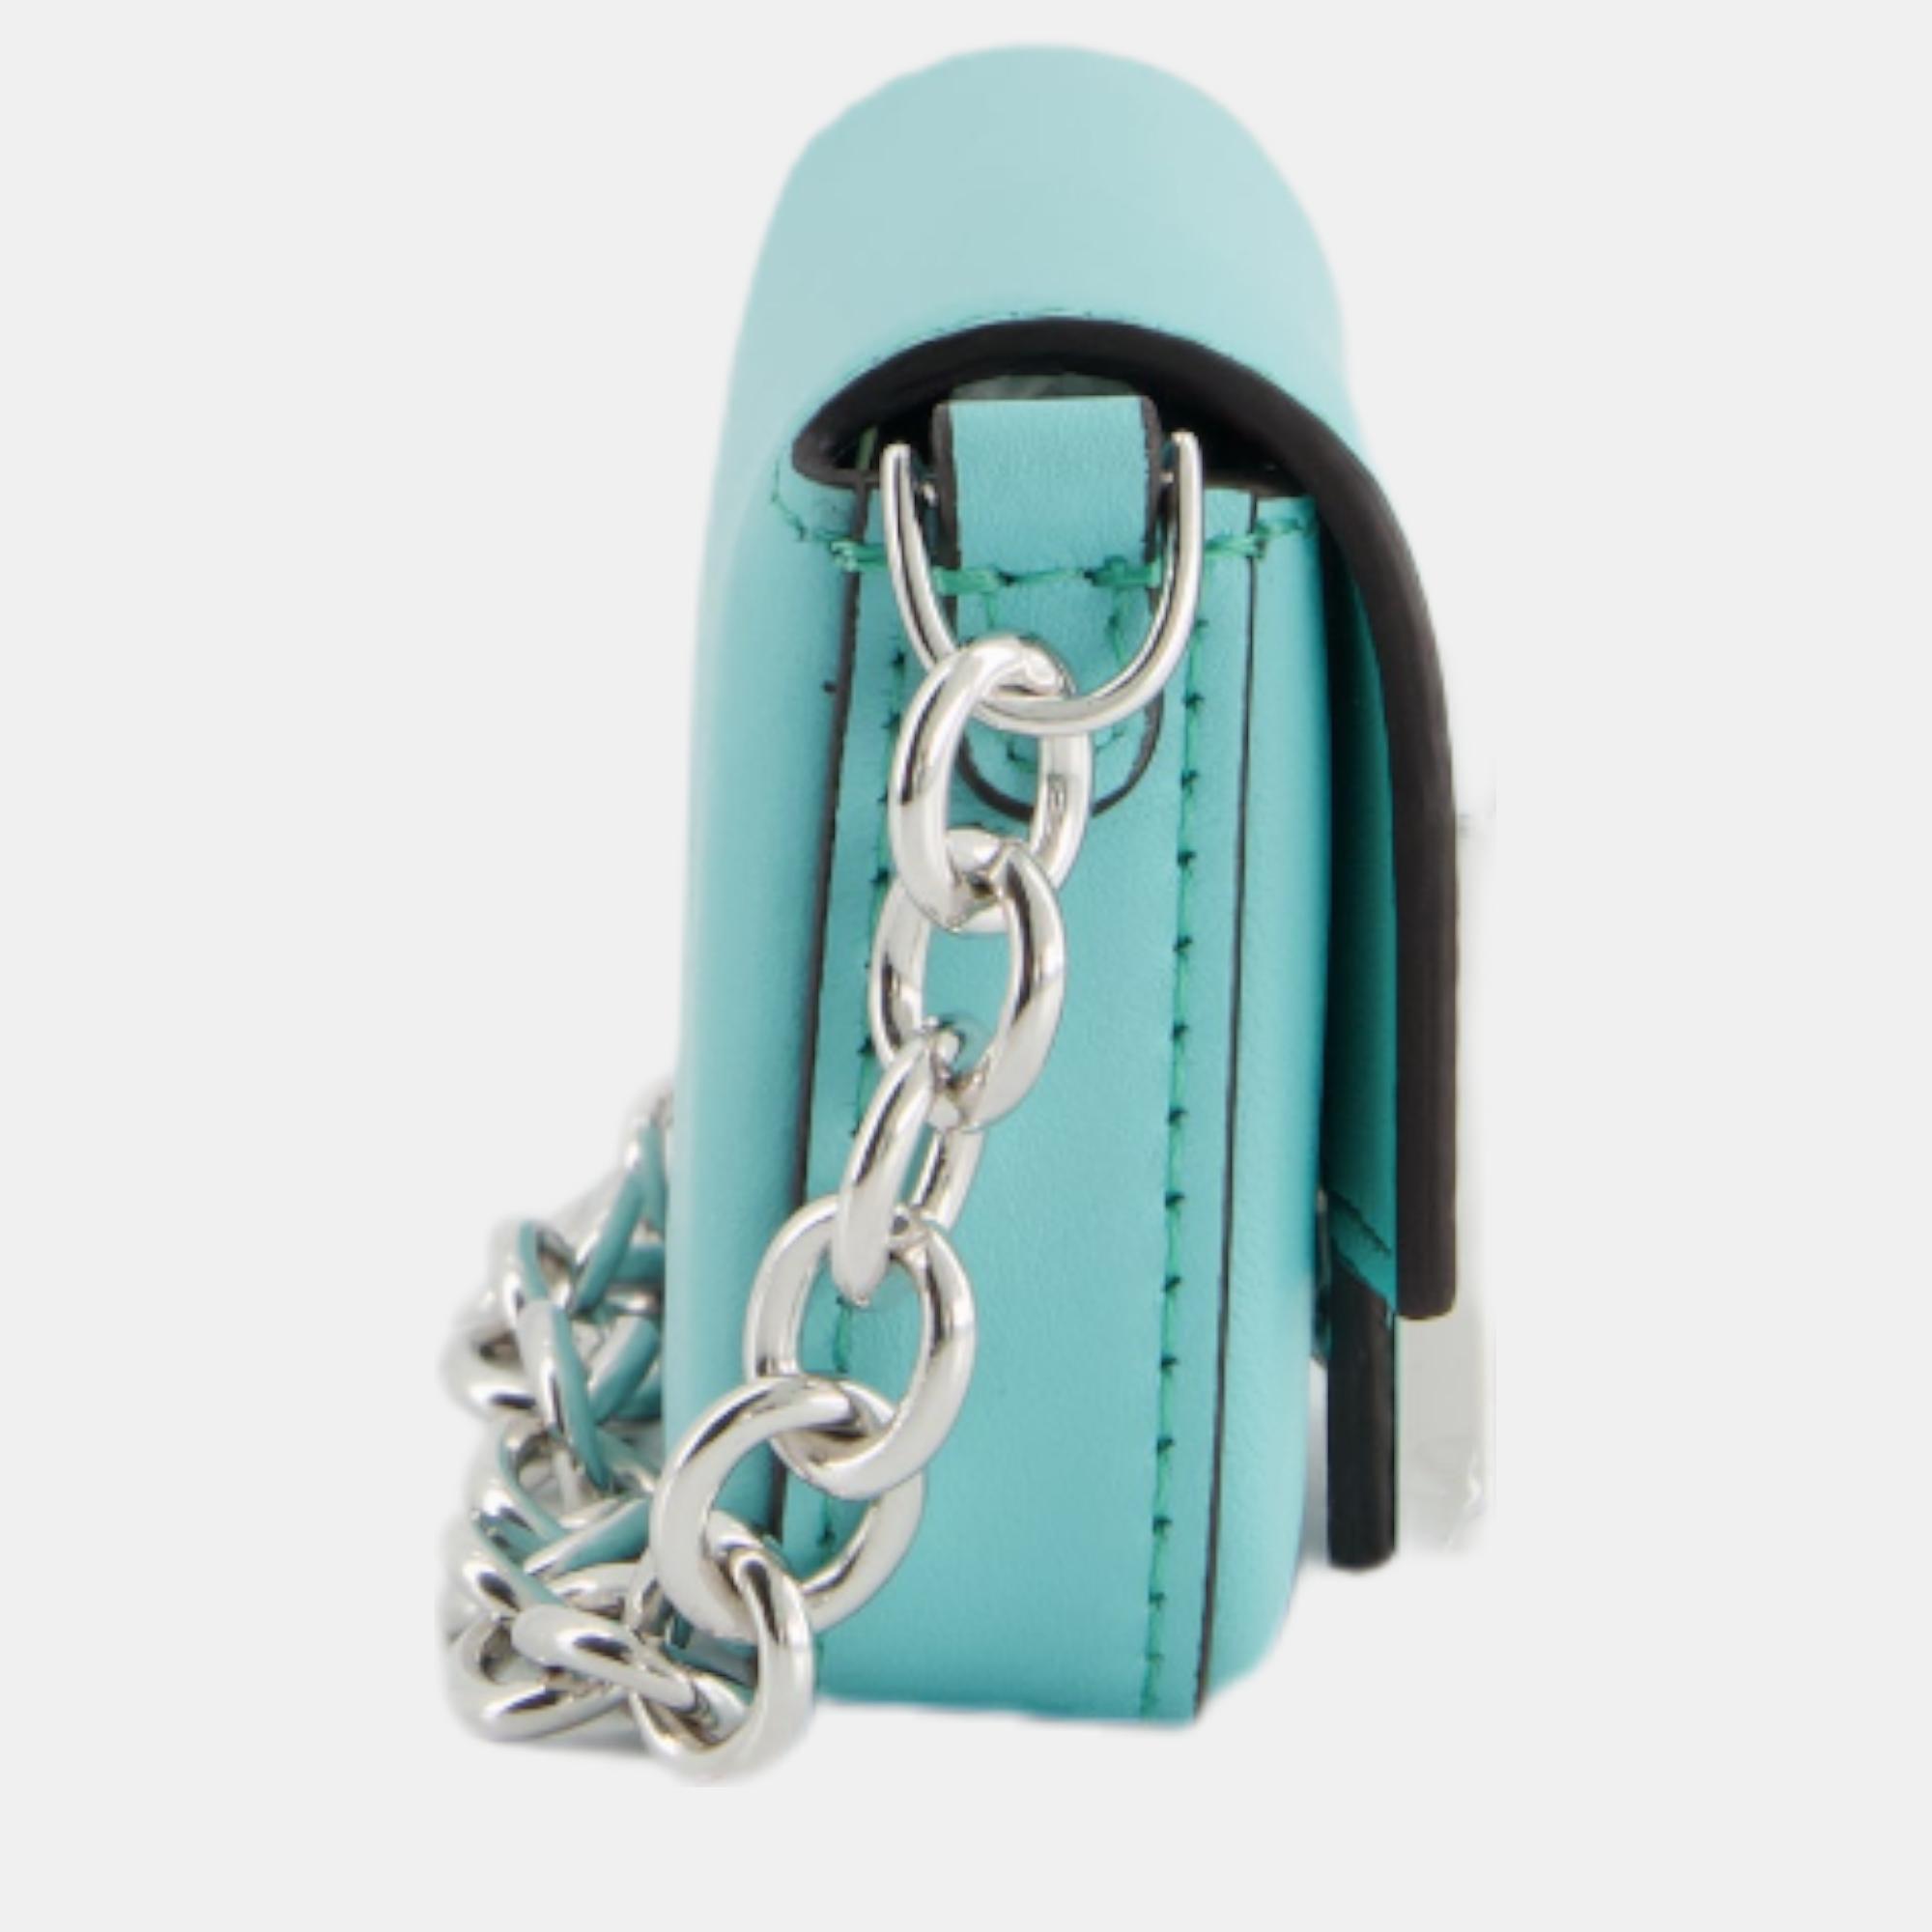 Fendi X Tiffany&Co Tiffany Blue Leather Nano Baguette Bag With Sterling Silver Hardware And Tiffany Tag